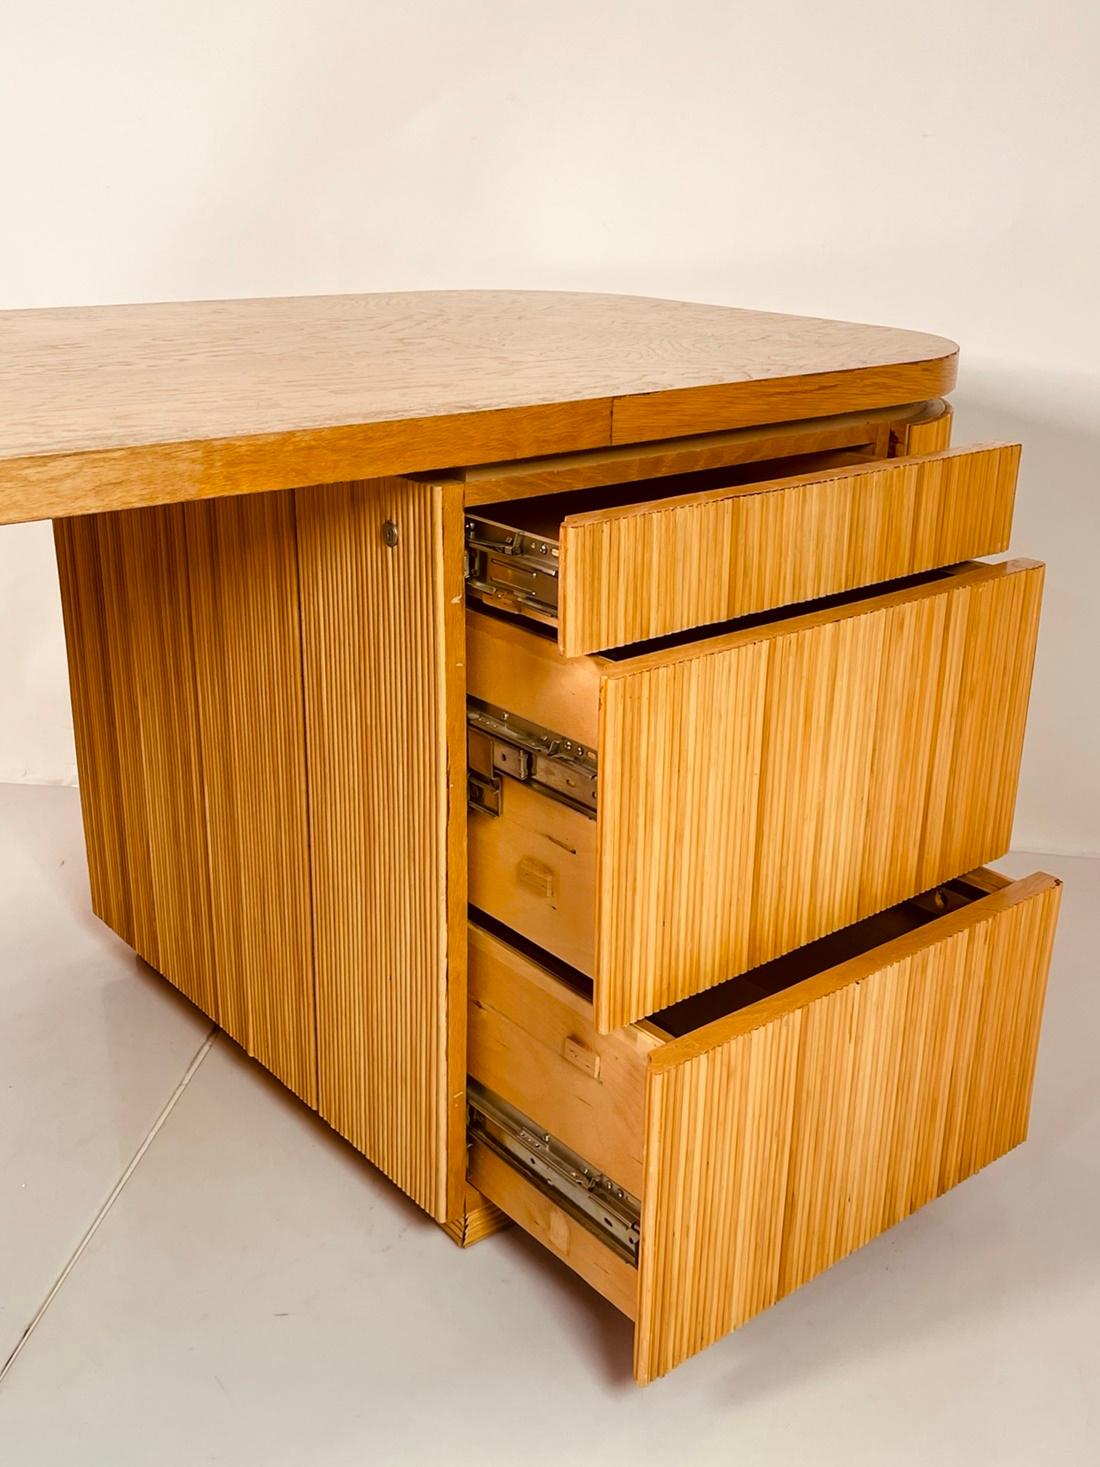 Pencil Reed Executive Desk in the Style of Karl Springer, USA 1970's In Good Condition For Sale In Los Angeles, CA